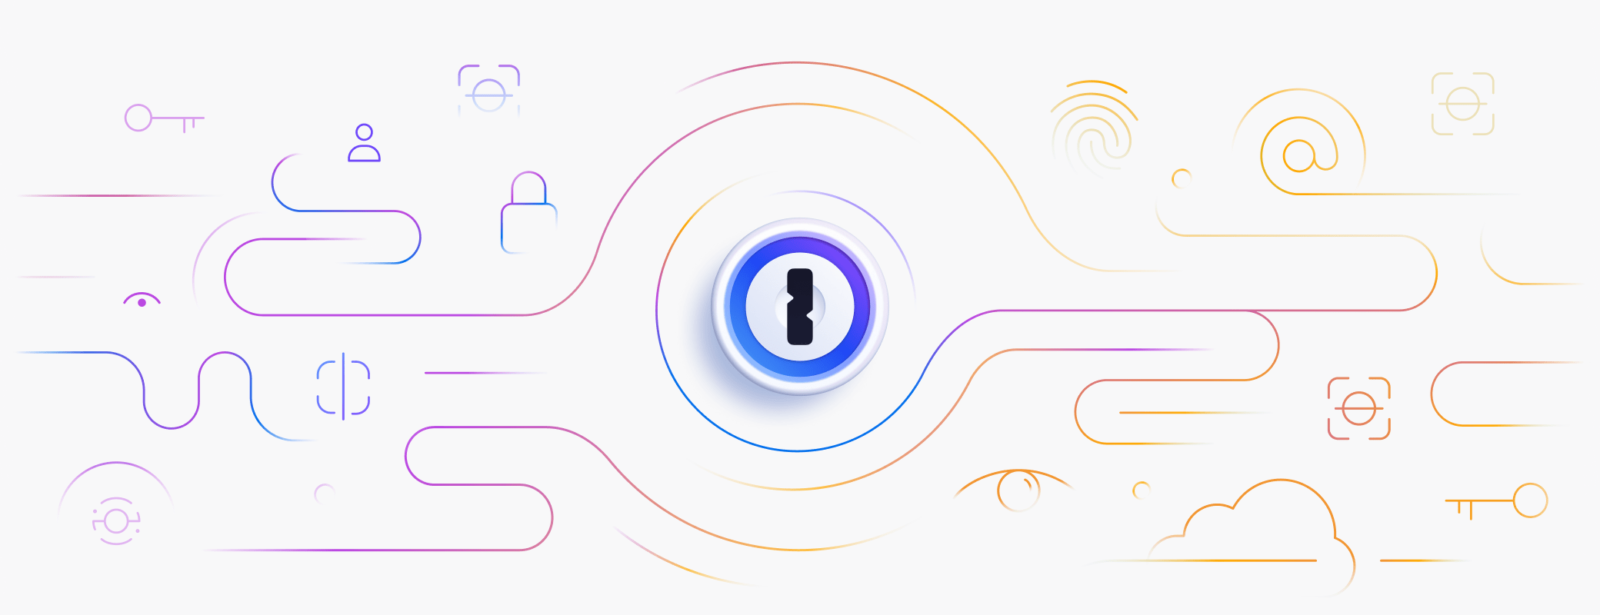 1Password helps Apple end the traditional password